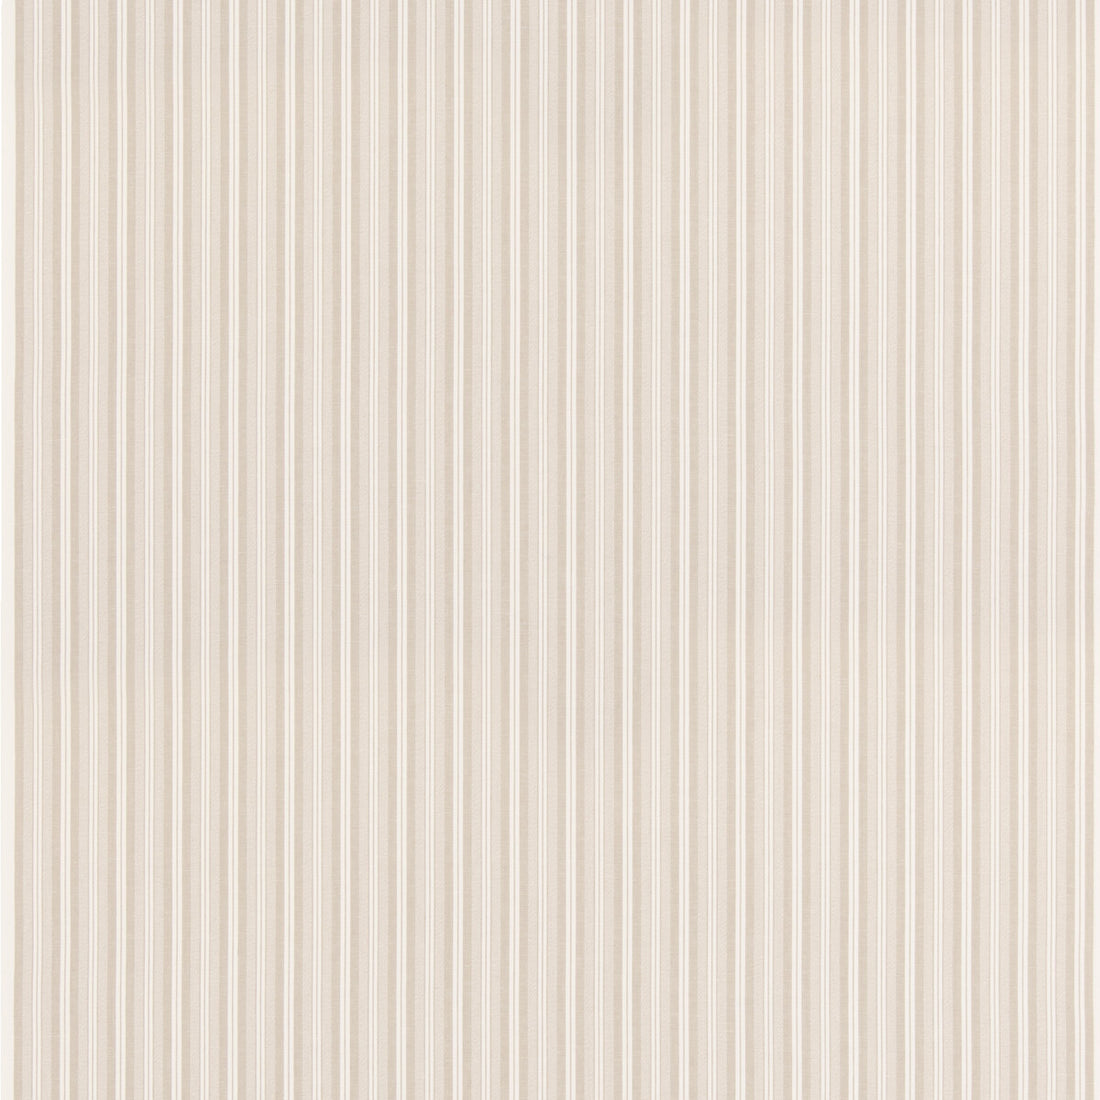 Laverton Stripe fabric in oatmeal color - pattern BF11037.230.0 - by G P &amp; J Baker in the Baker House Plain &amp; Stripe II collection